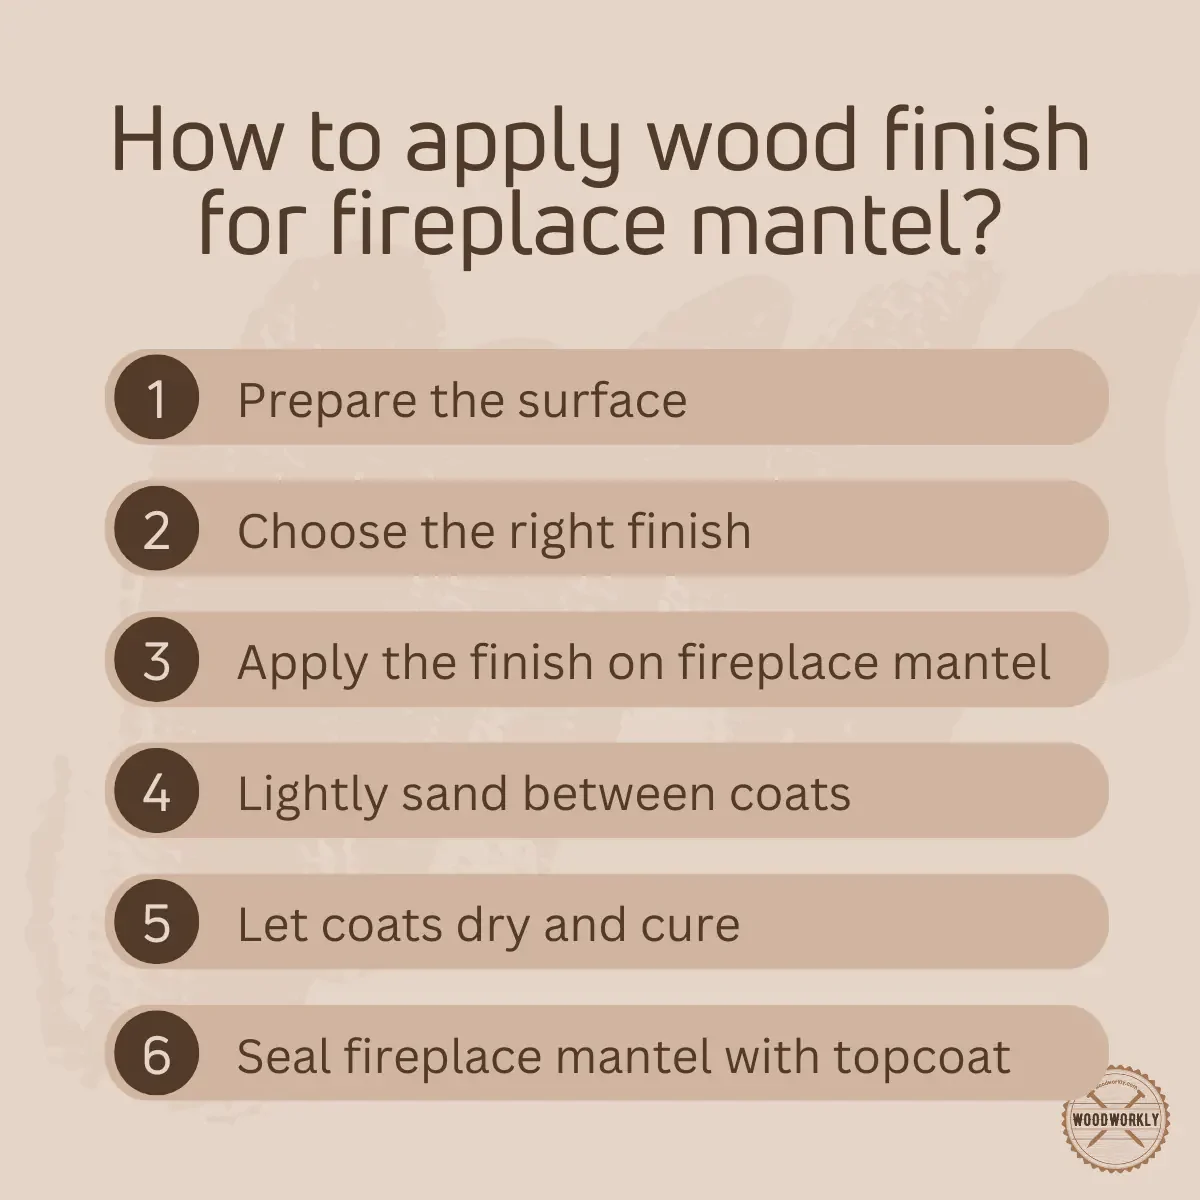 how to apply wood finish on fireplace mantel